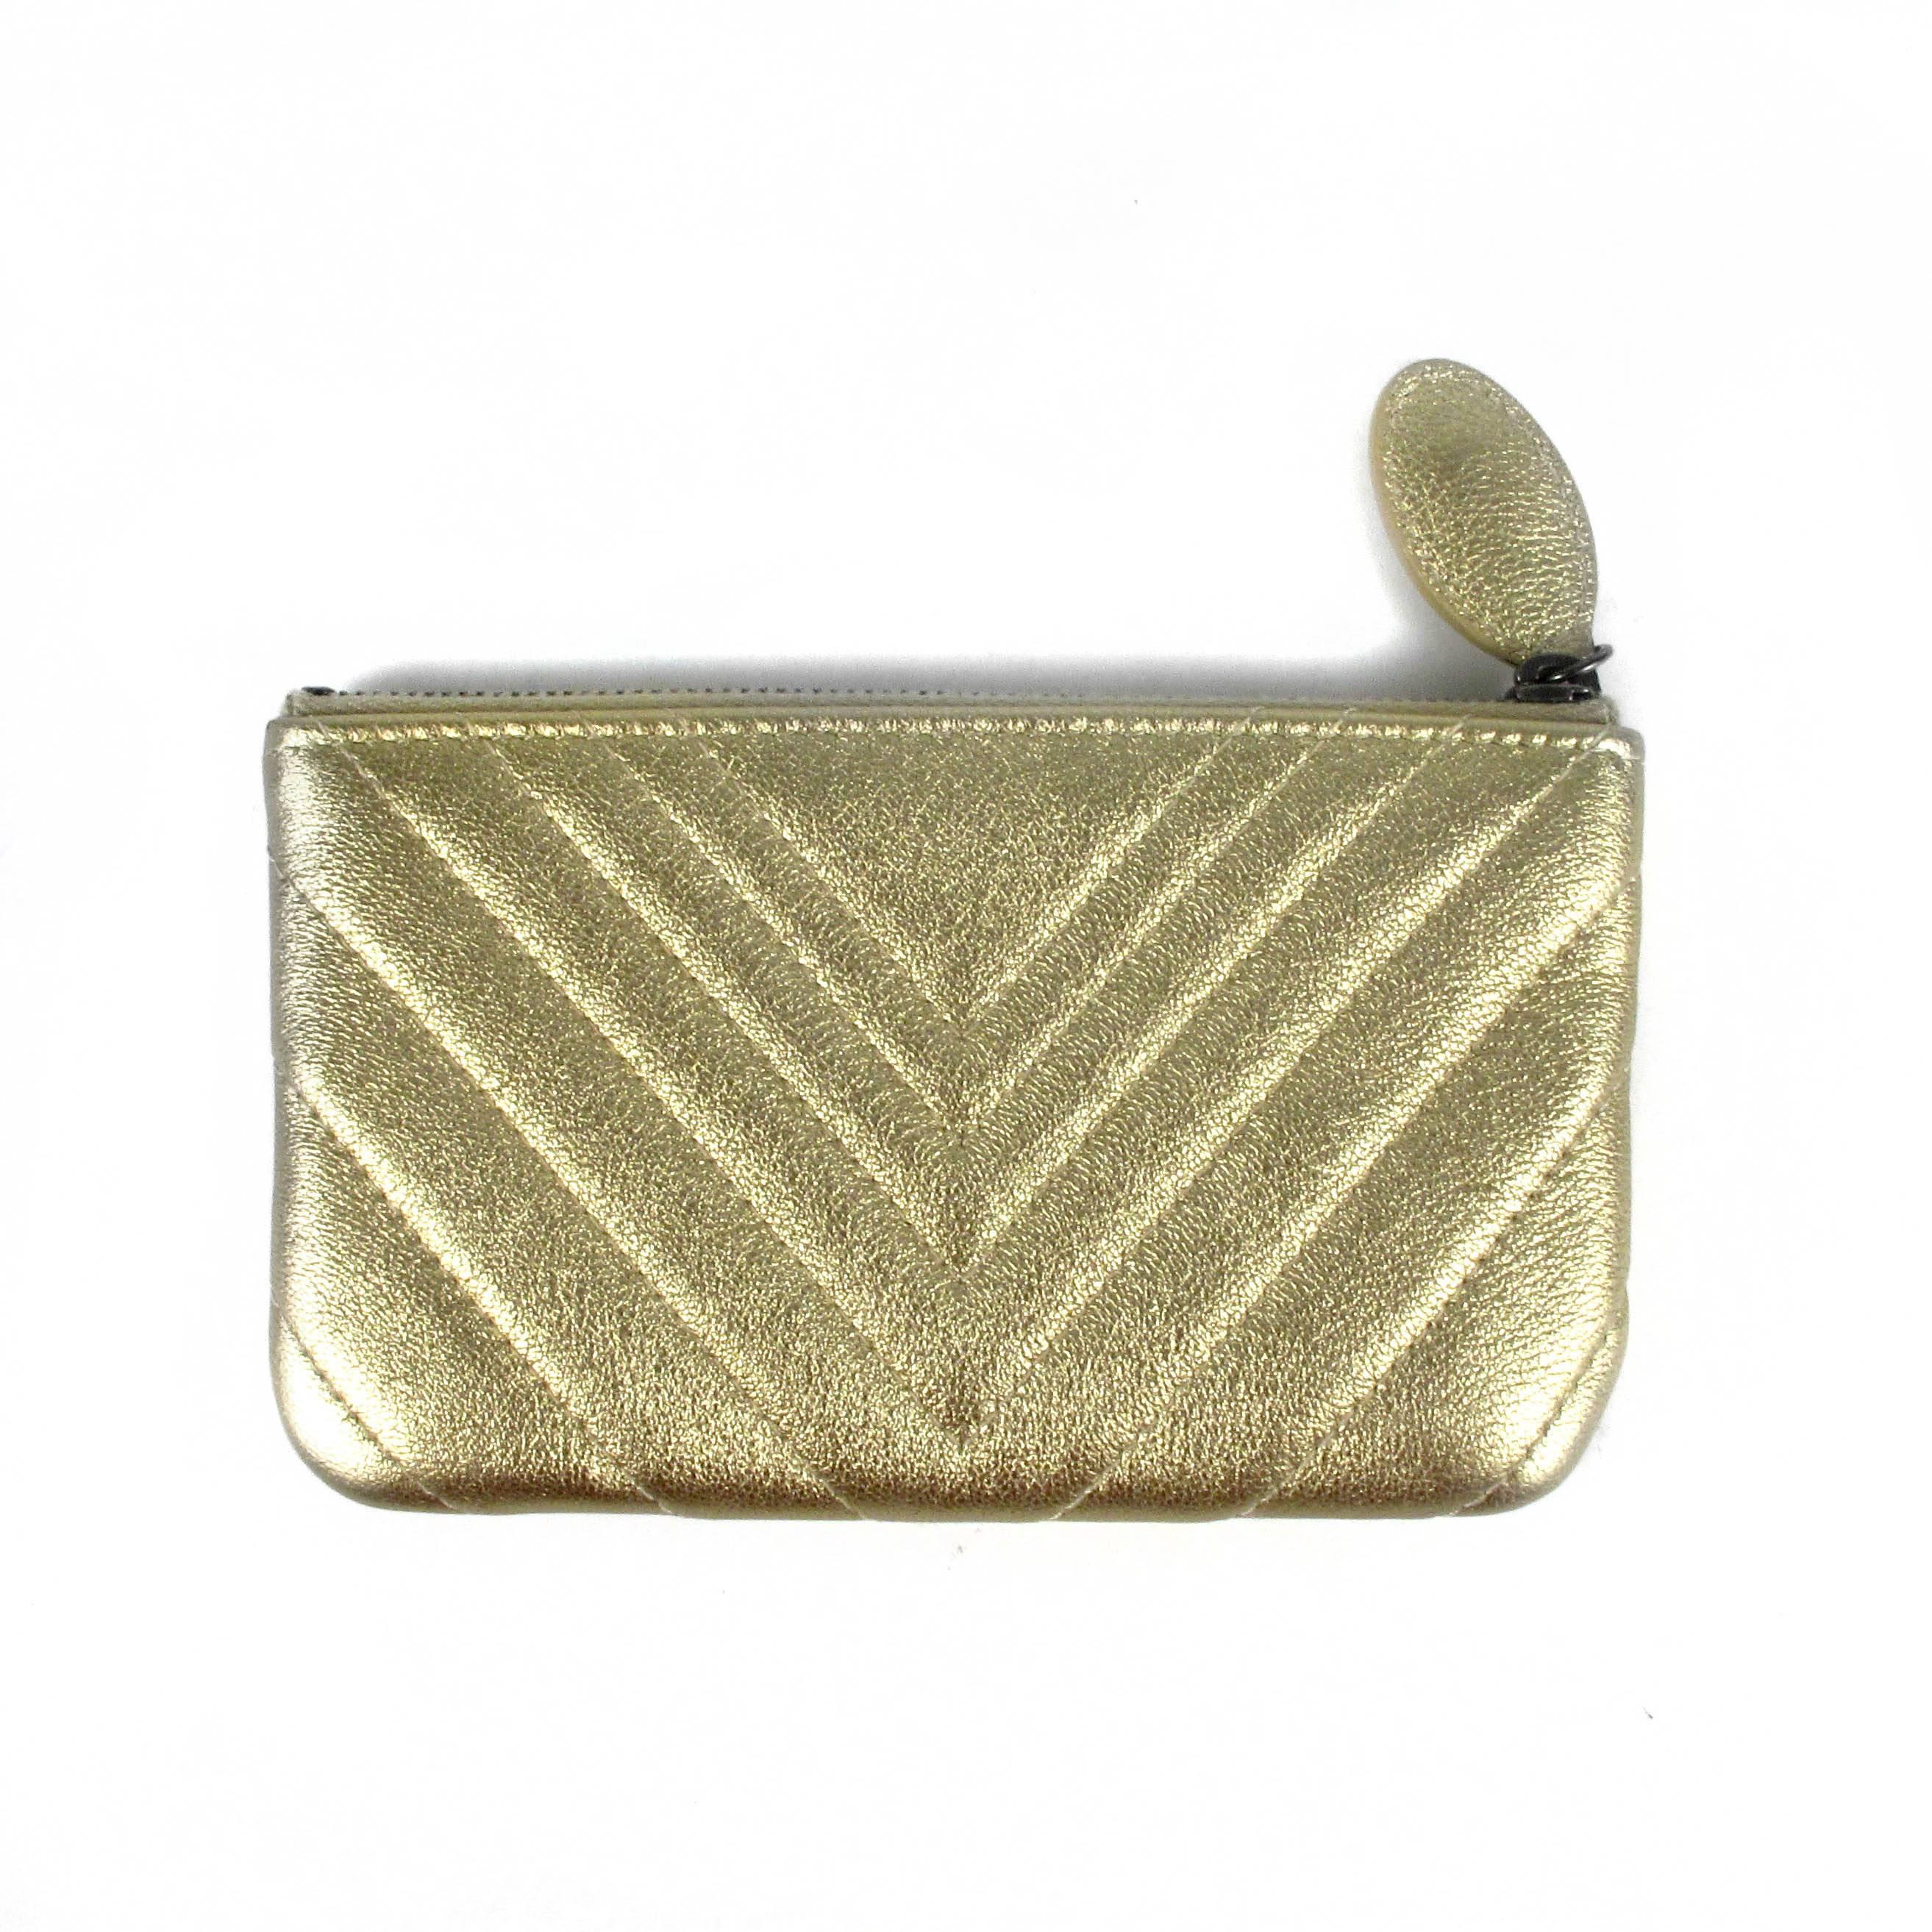 Chanel - Chevron Small Clutch Bag

Color: Metallic Gold 

Material: Leather

------------------------------------------------------------
Details:

- chevron quilted leather

- gunmetal hardware

- CC logo at front

- zip top closure

- serial